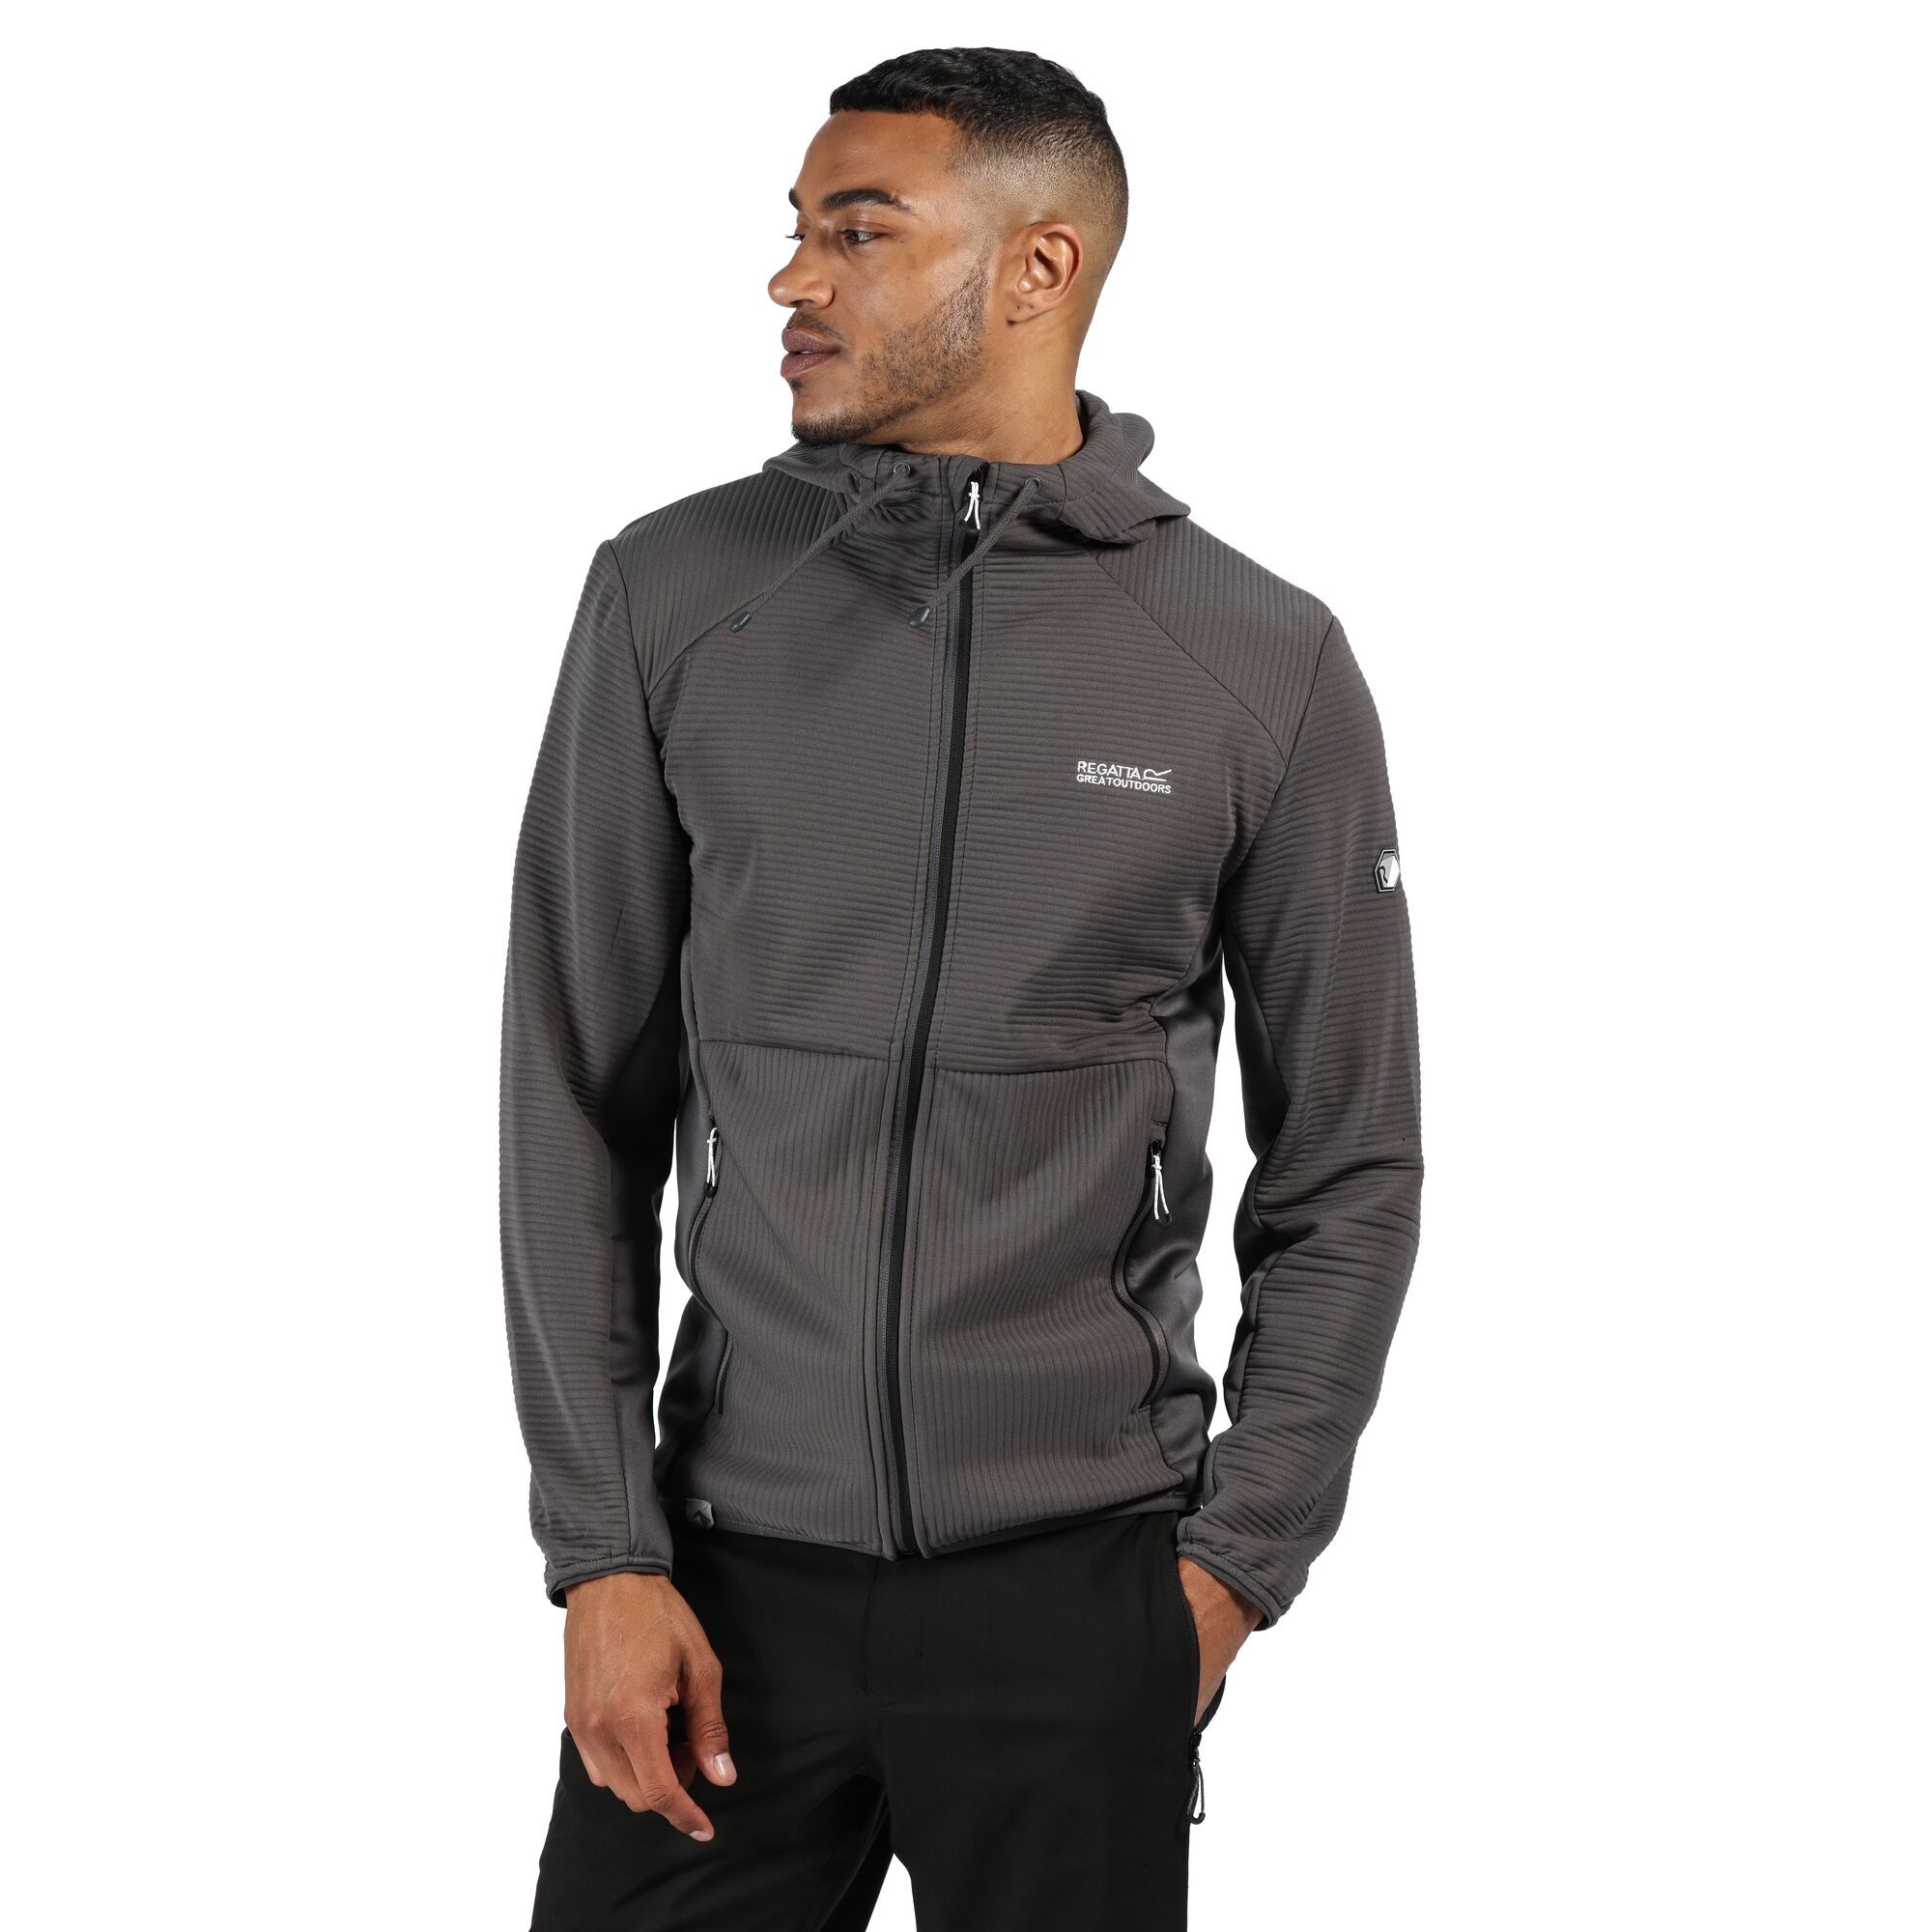 Material: 90% polyester, 10% elastane. Ribbed fabric. Grown on hood. Extol stretch side and underarm panels. 2 zipped lower pockets. Stretch binding to cuffs and hem.